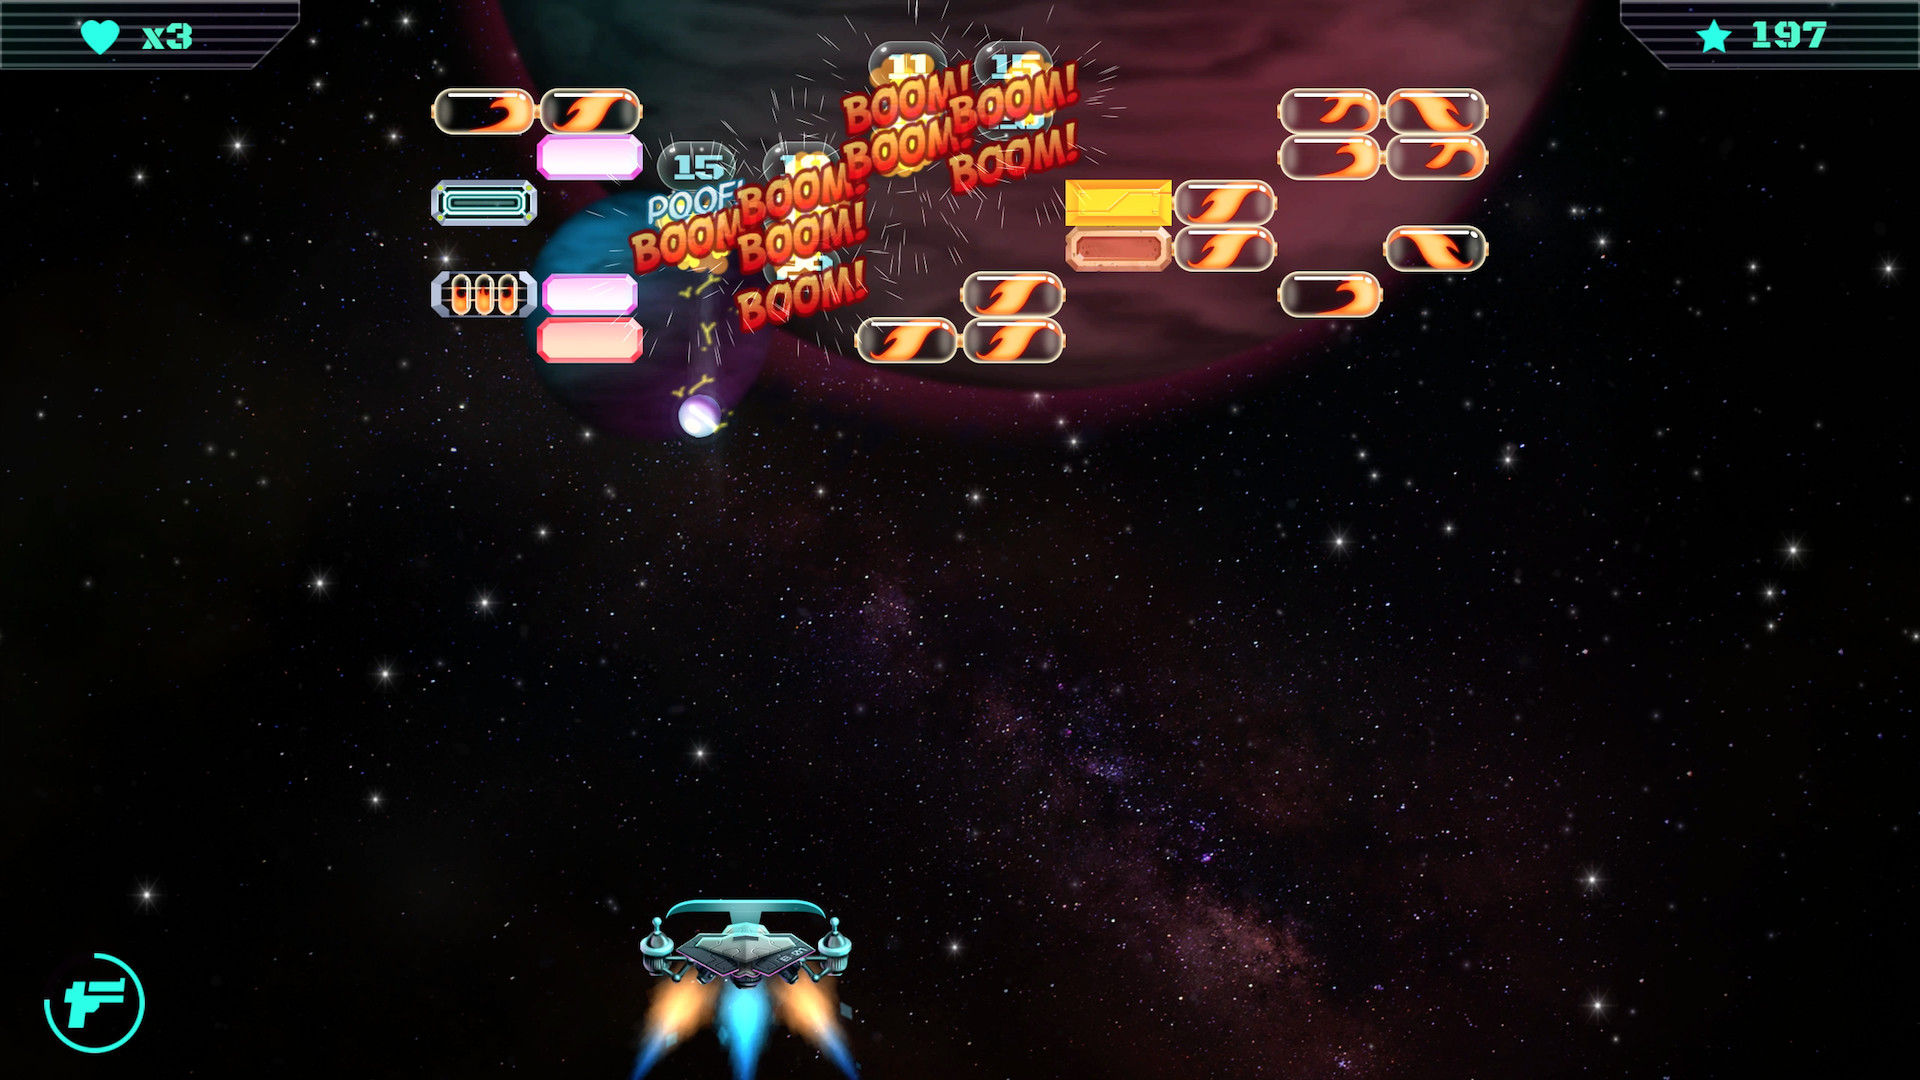 Another Brick in Space Steam CD Key 22.59 $